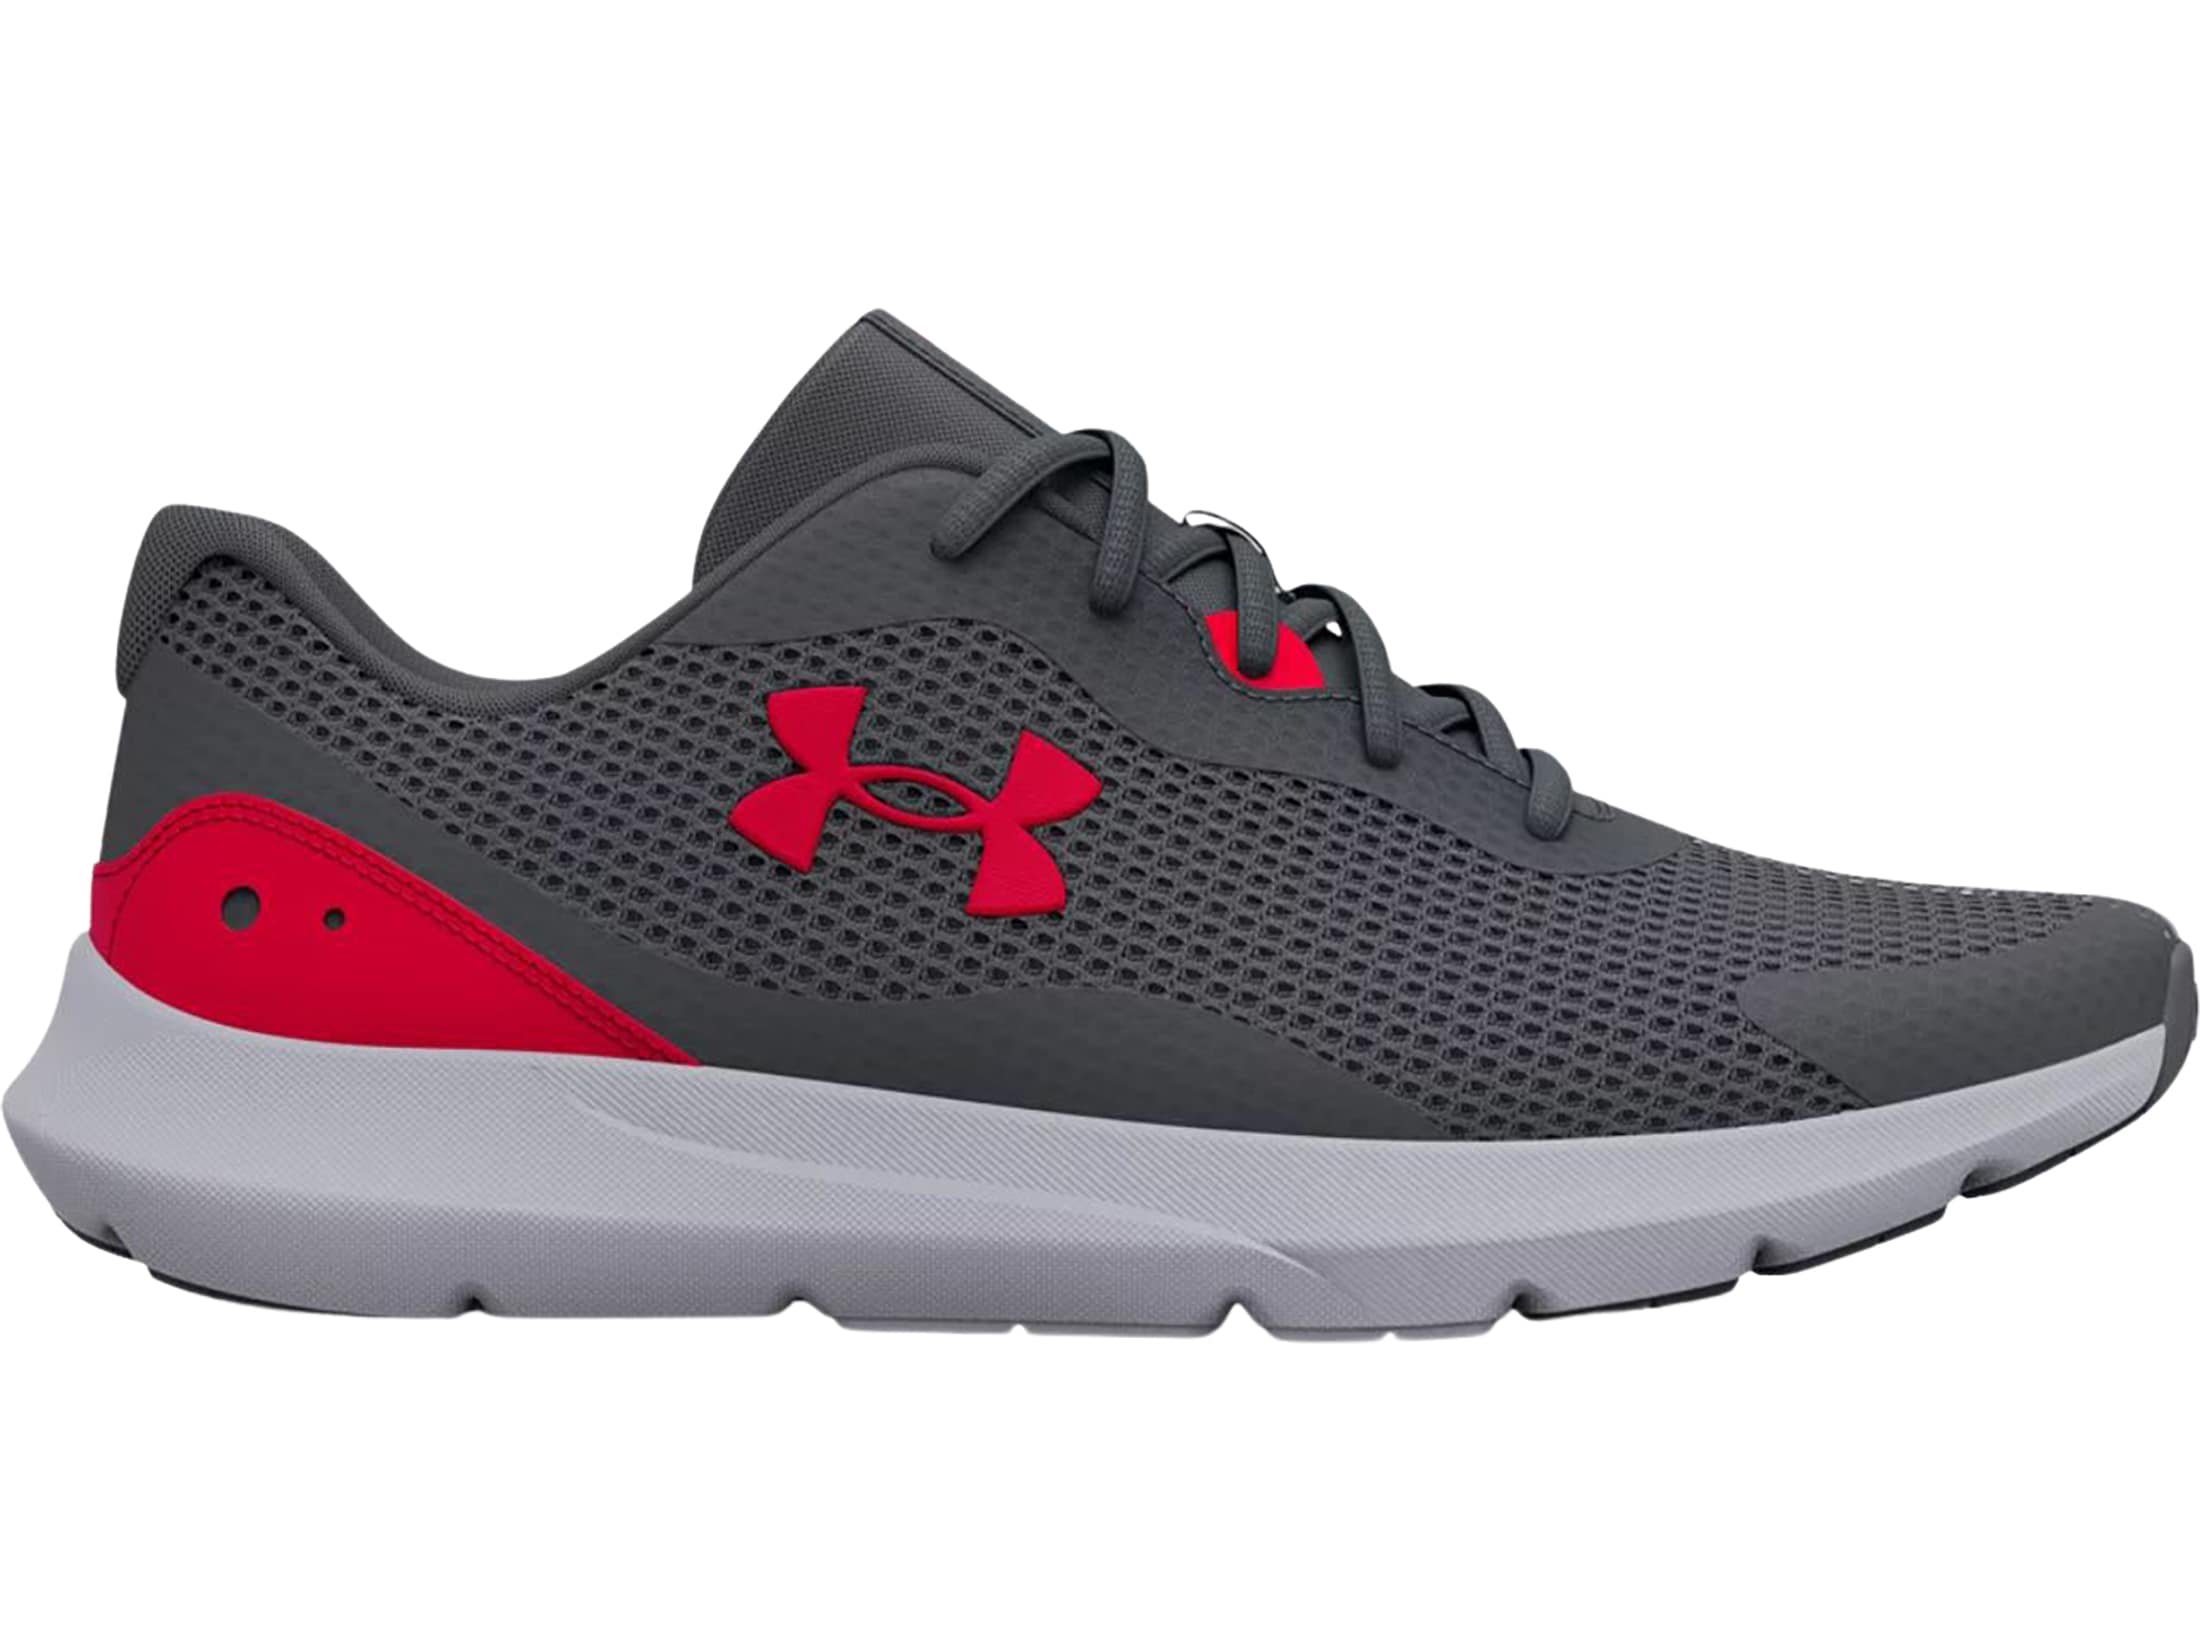 Under Armour Surge 3 Running Shoes Synthetic Pitch Gray/Mod Gray/Red